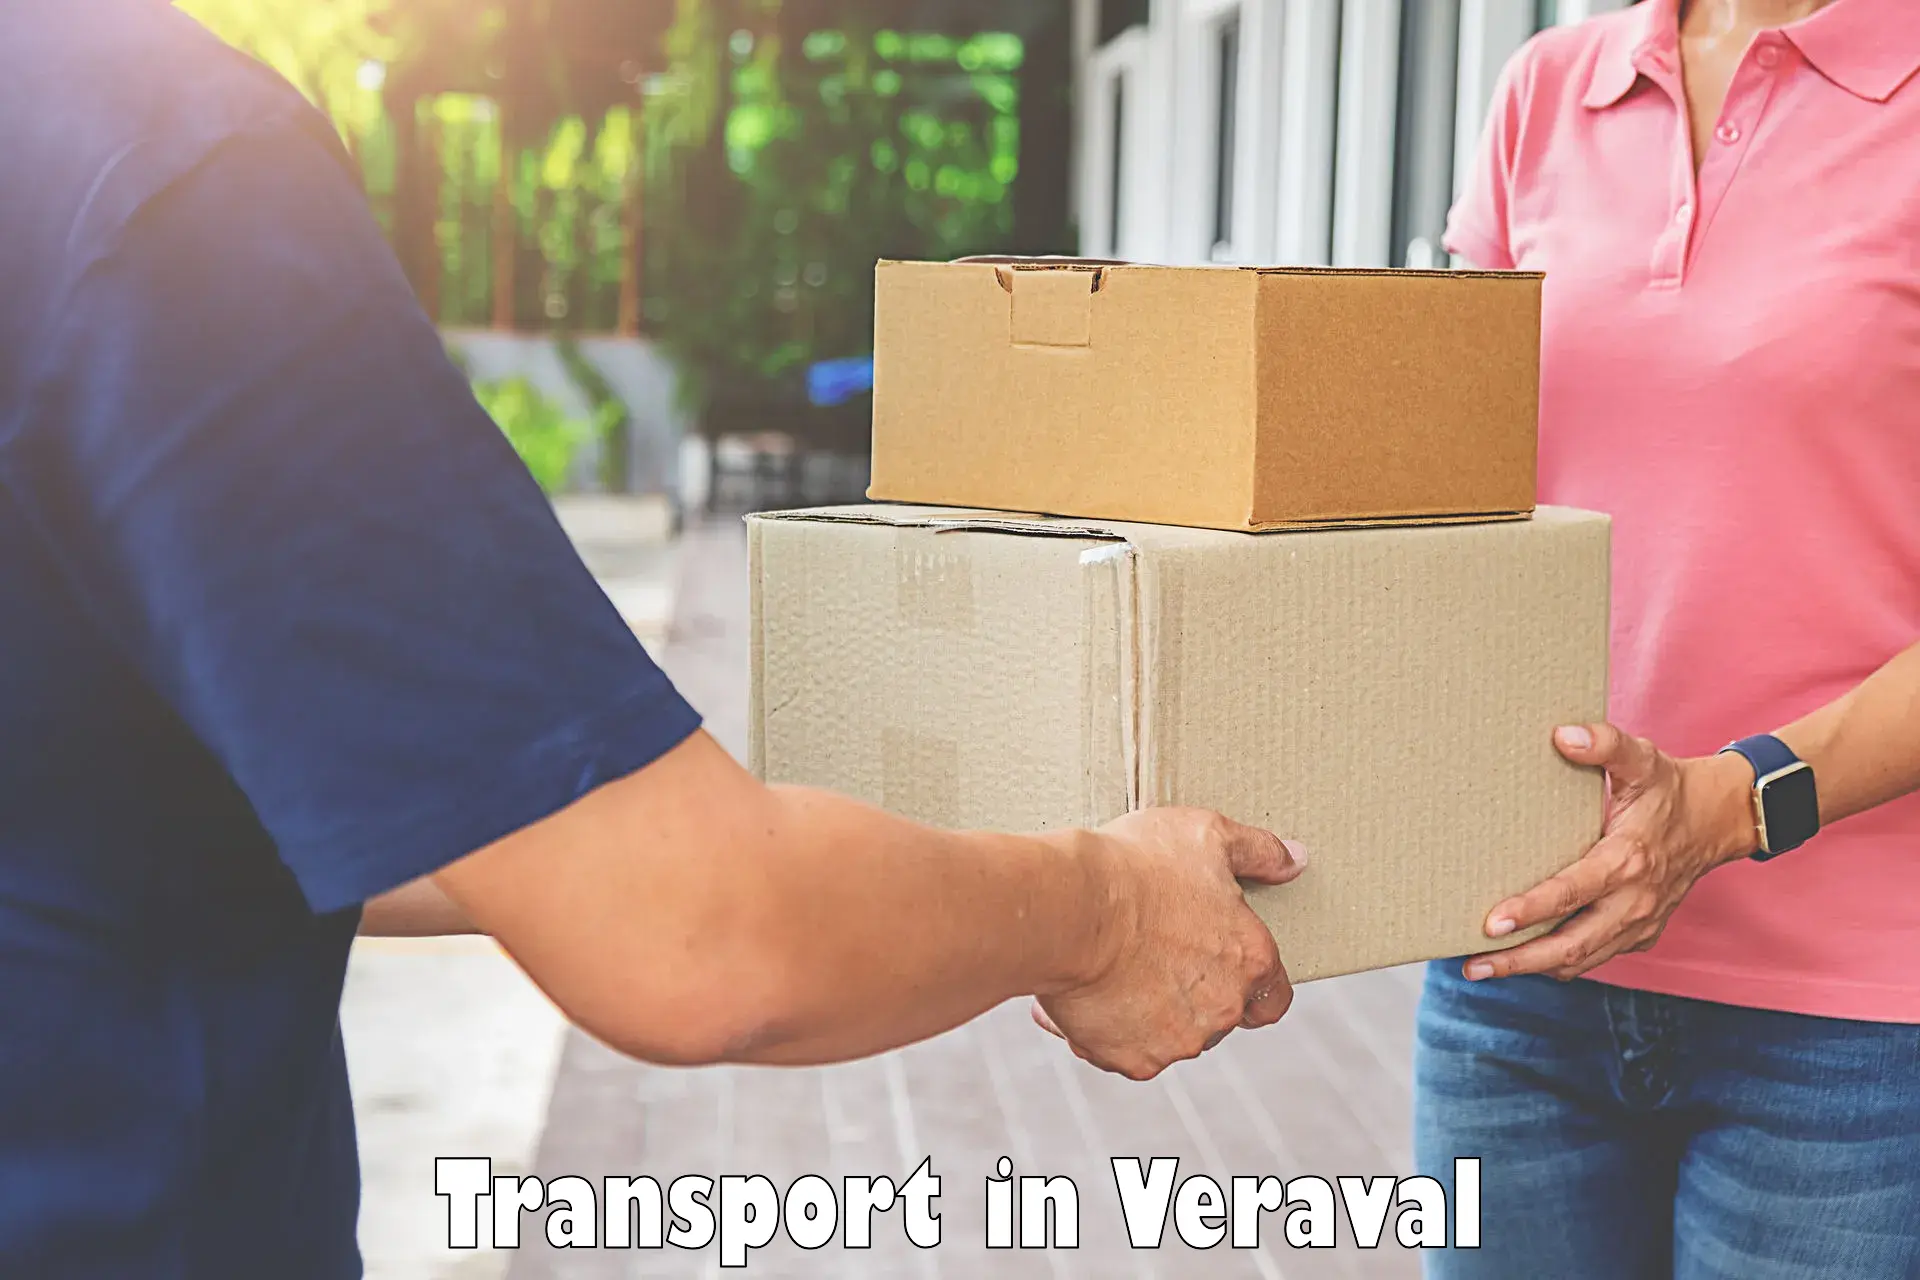 Vehicle transport services in Veraval